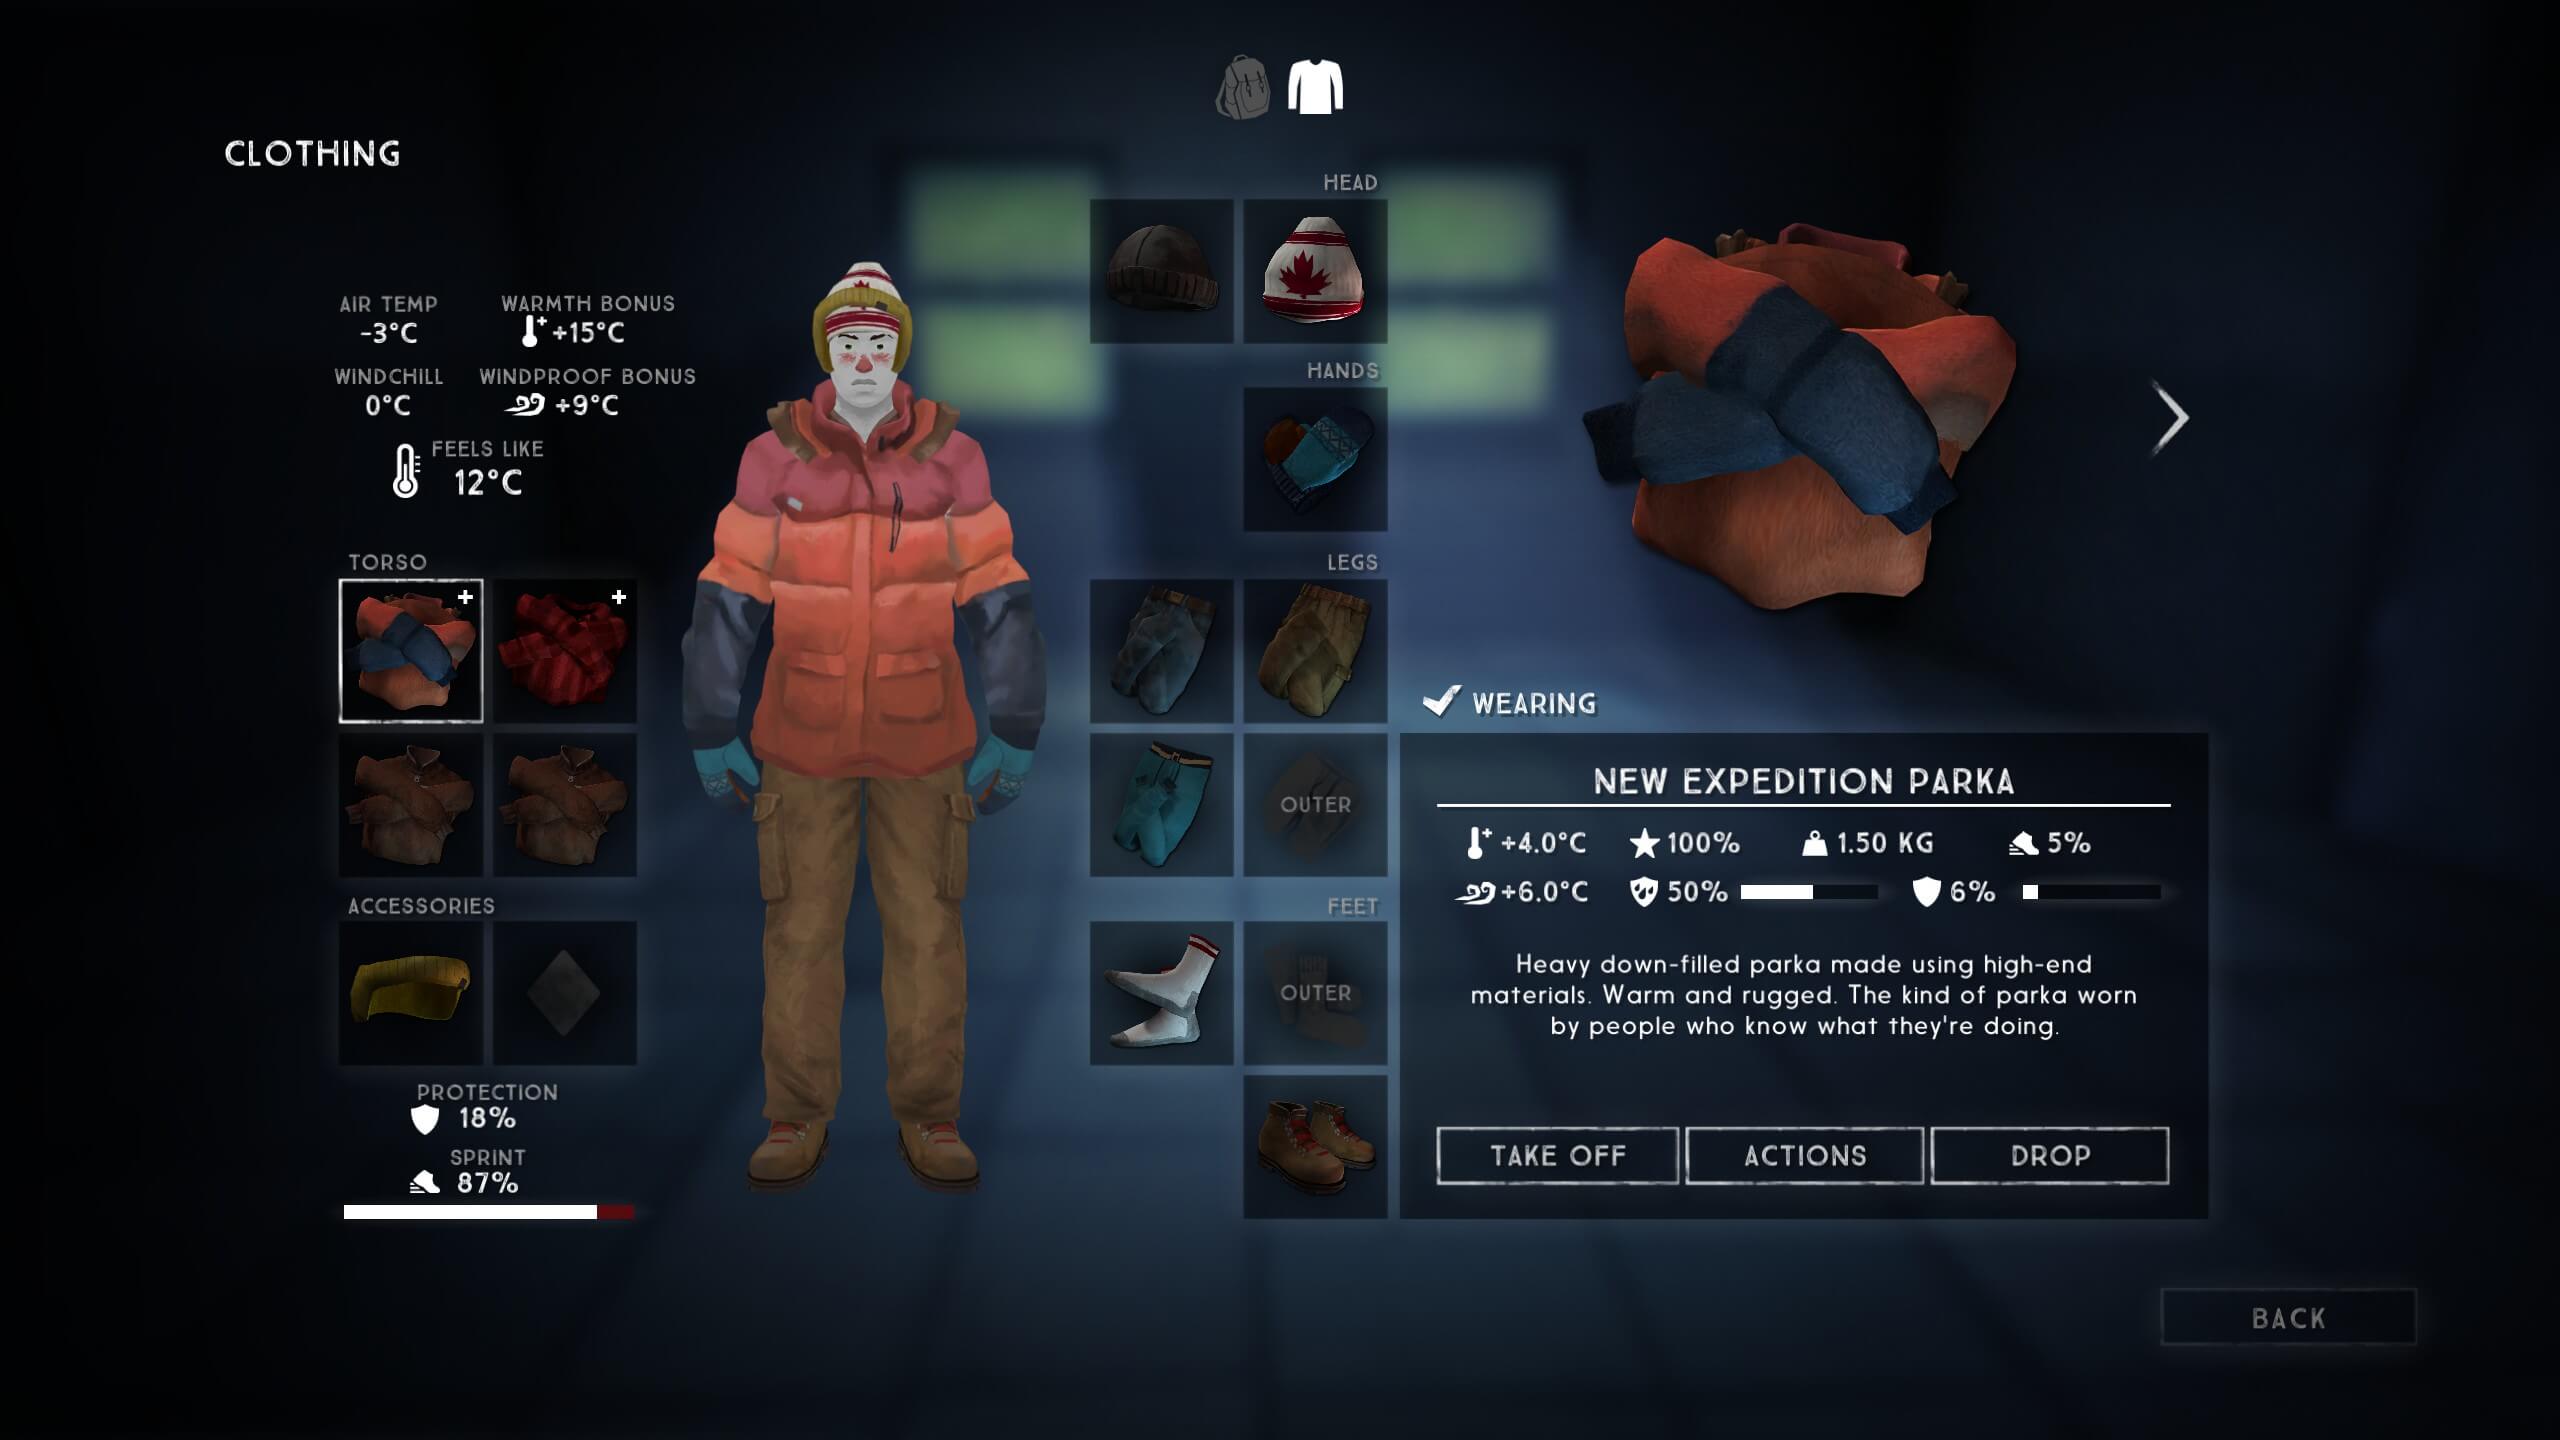 long dark best clothes, the long dark accessories, the long dark best clothing, the long dark clothing, the long dark clothing chart, the long dark clothing guide